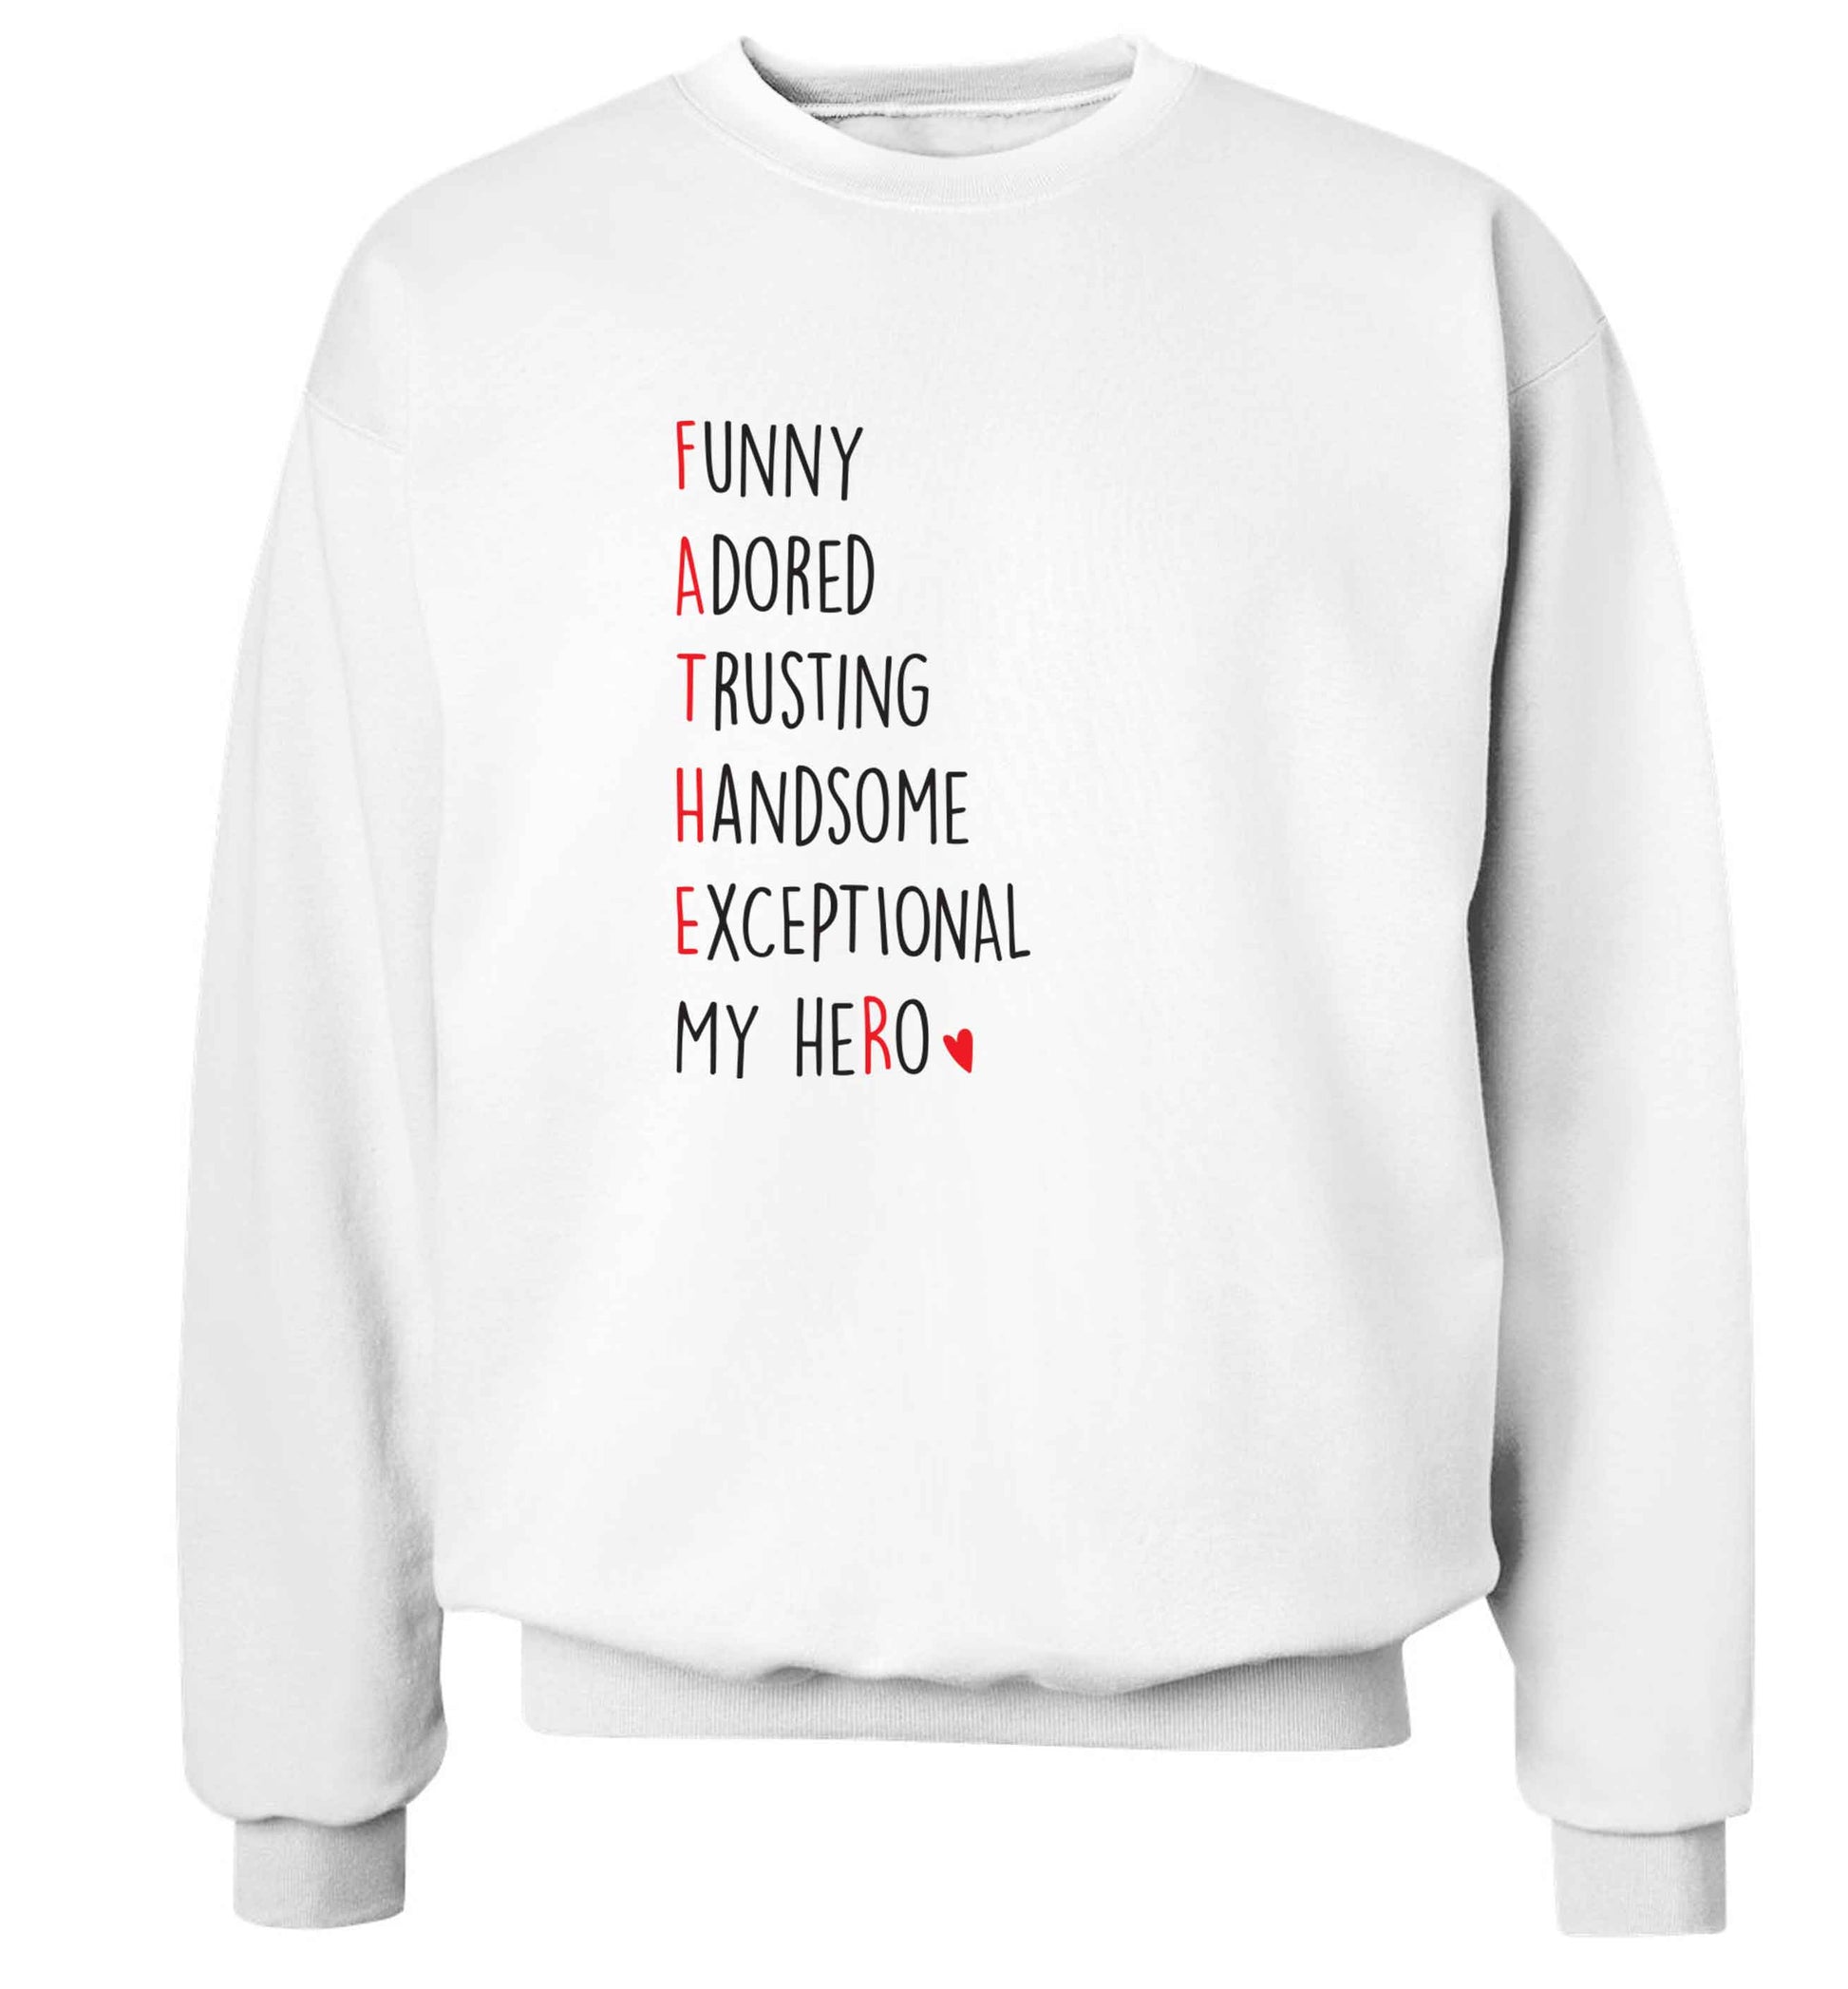 Father meaning hero acrostic poem adult's unisex white sweater 2XL